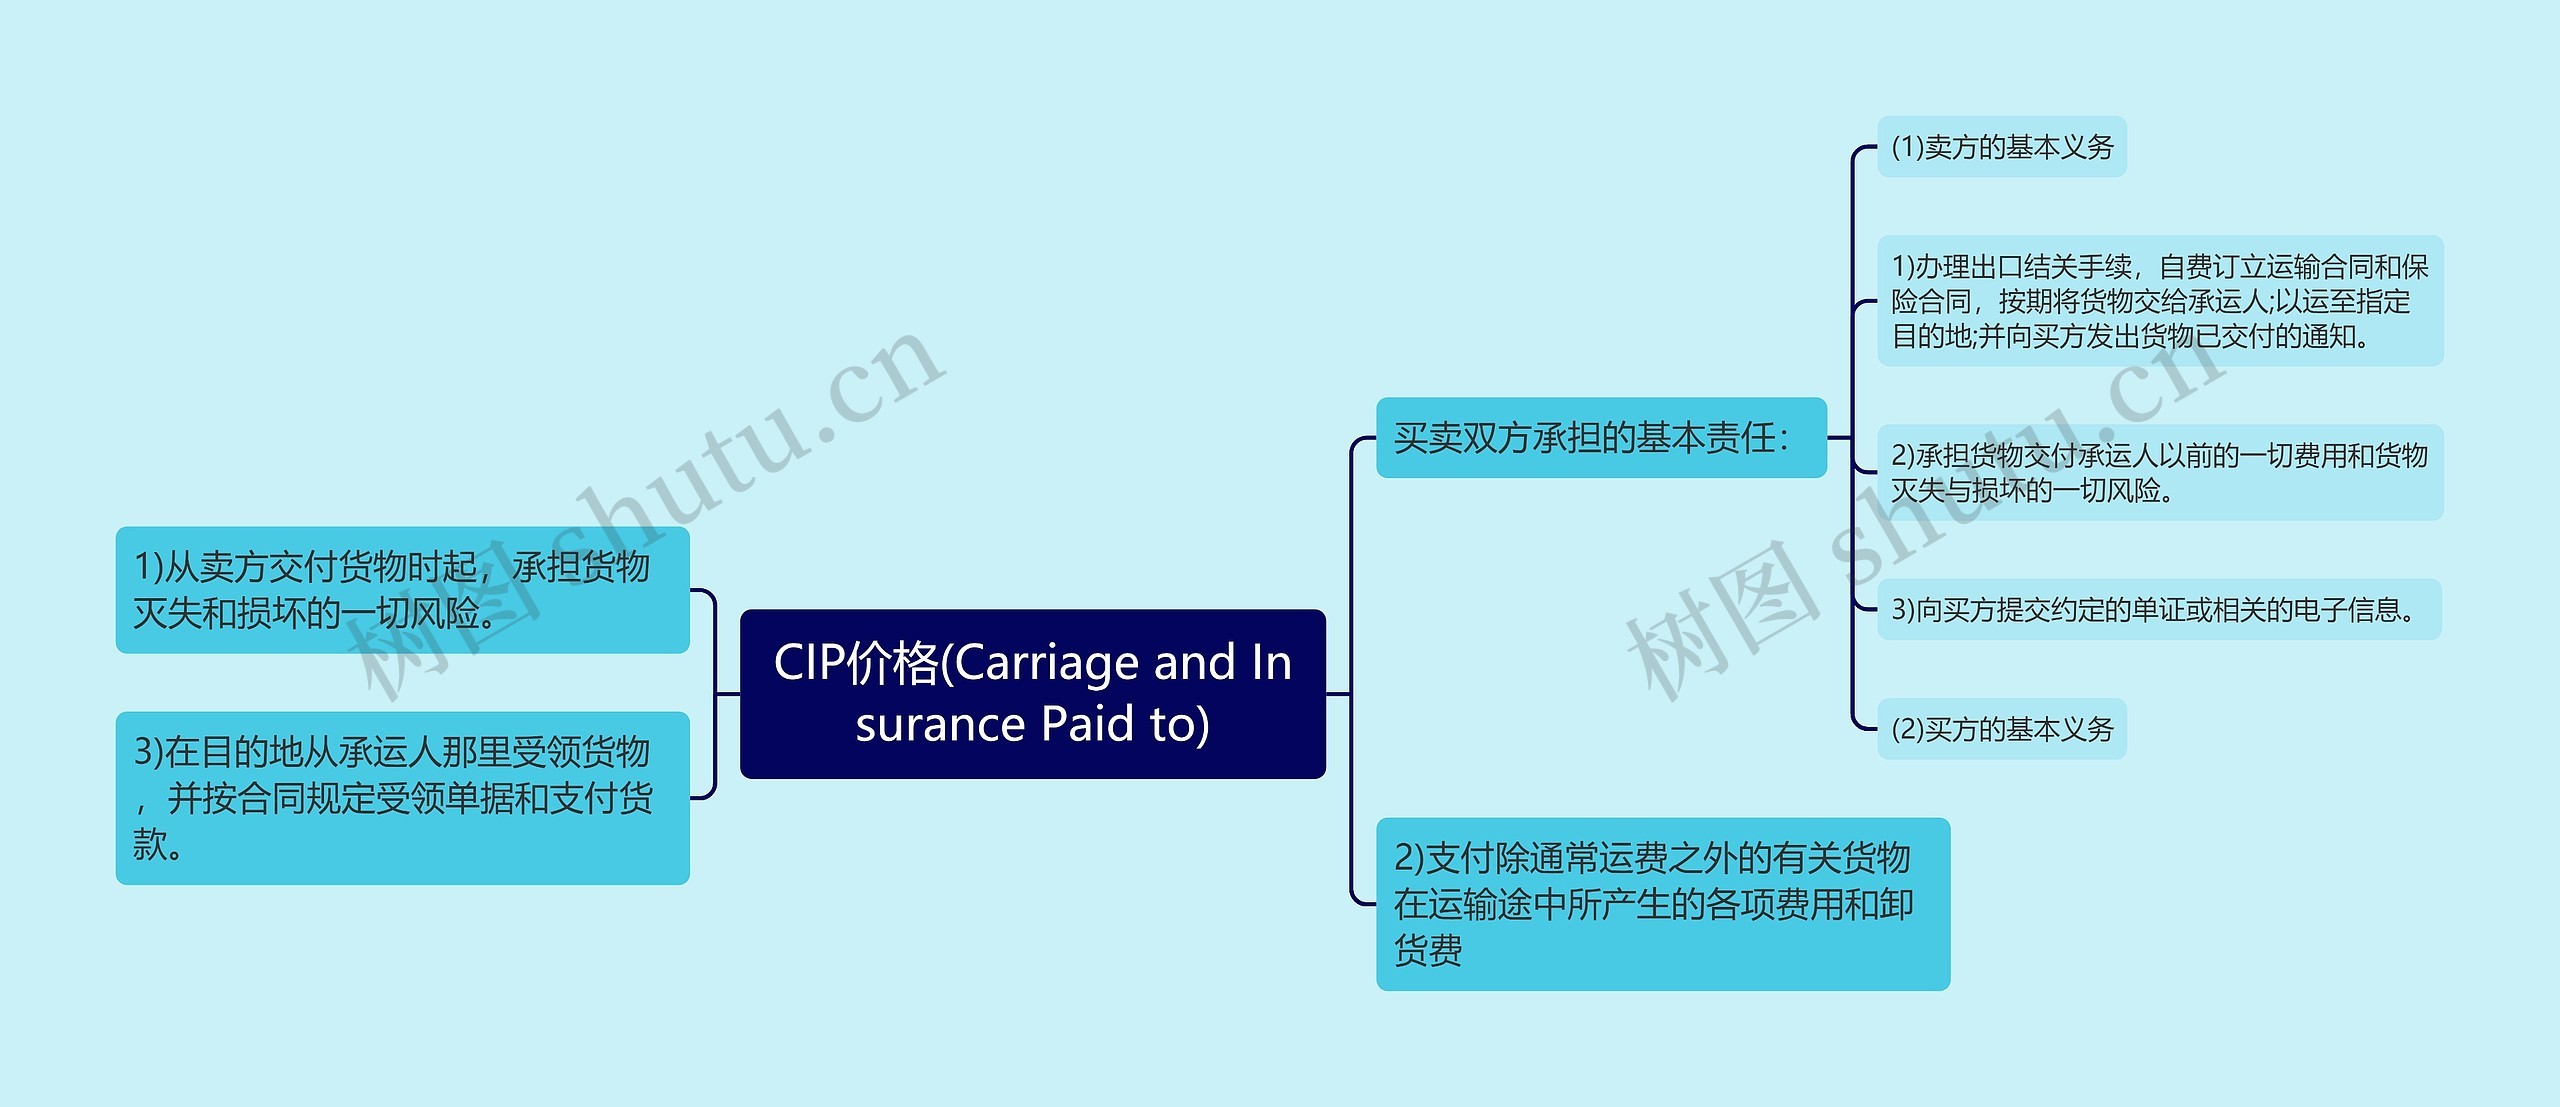 CIP价格(Carriage and Insurance Paid to)